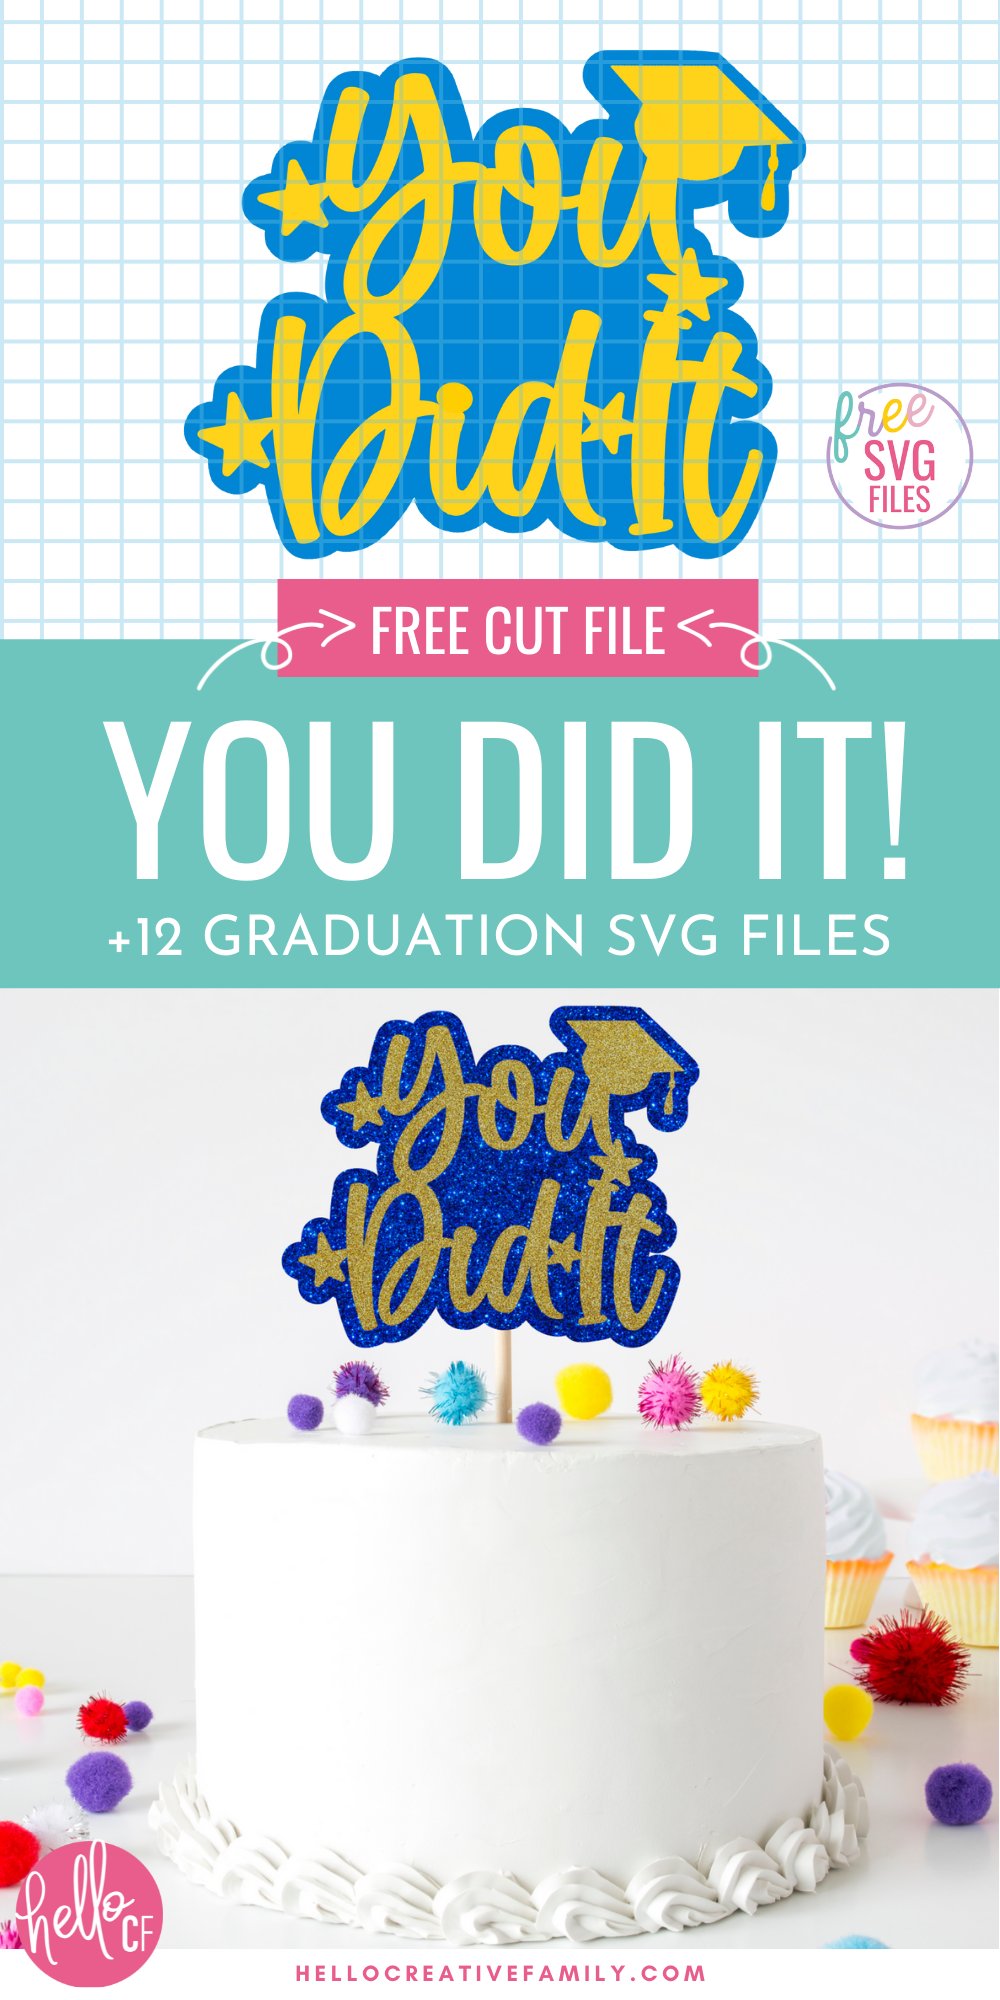 If you have a special student in your life graduating soon then you will not want to miss this collection of 12 free graduation SVG files! This collection has a ton of inspiring cut files for making graduation party decorations, cards, t-shirts and so much more using your Cricut or Silhouette cutting machine!